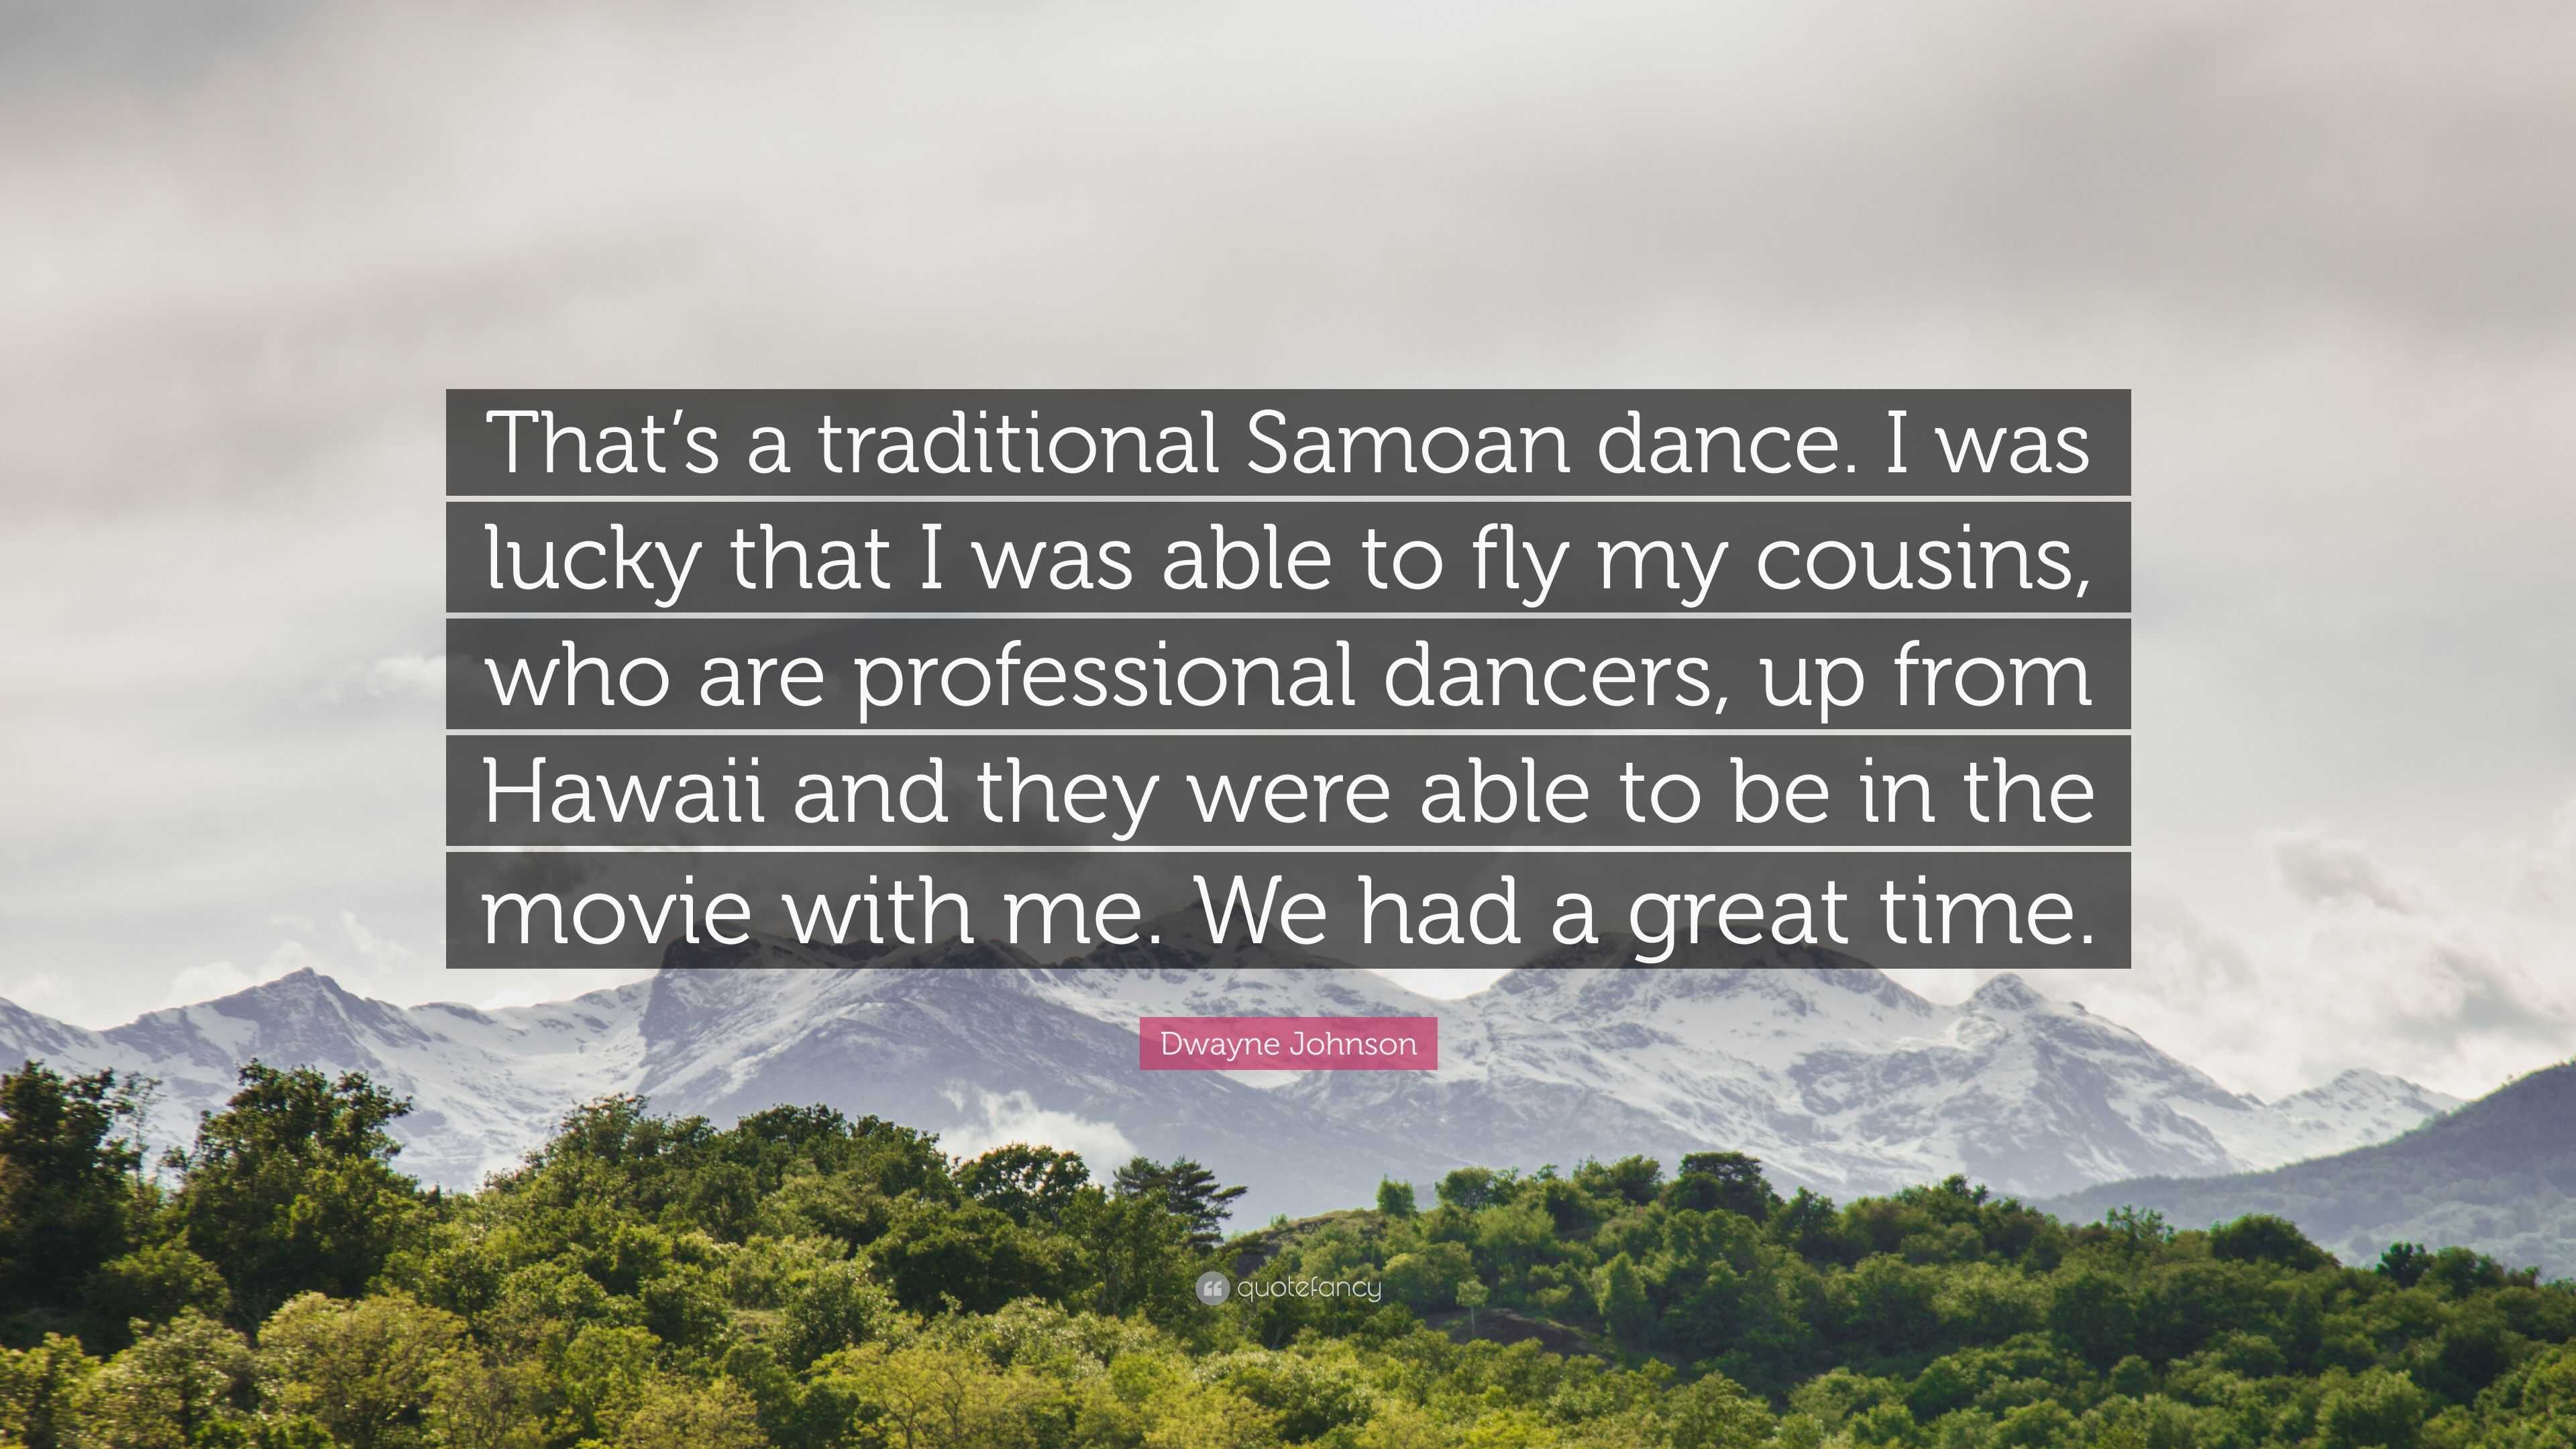 Dwayne Johnson Quote: “That's a traditional Samoan dance. I was lucky that  I was able to fly my cousins, who are professional dancers, up from ”